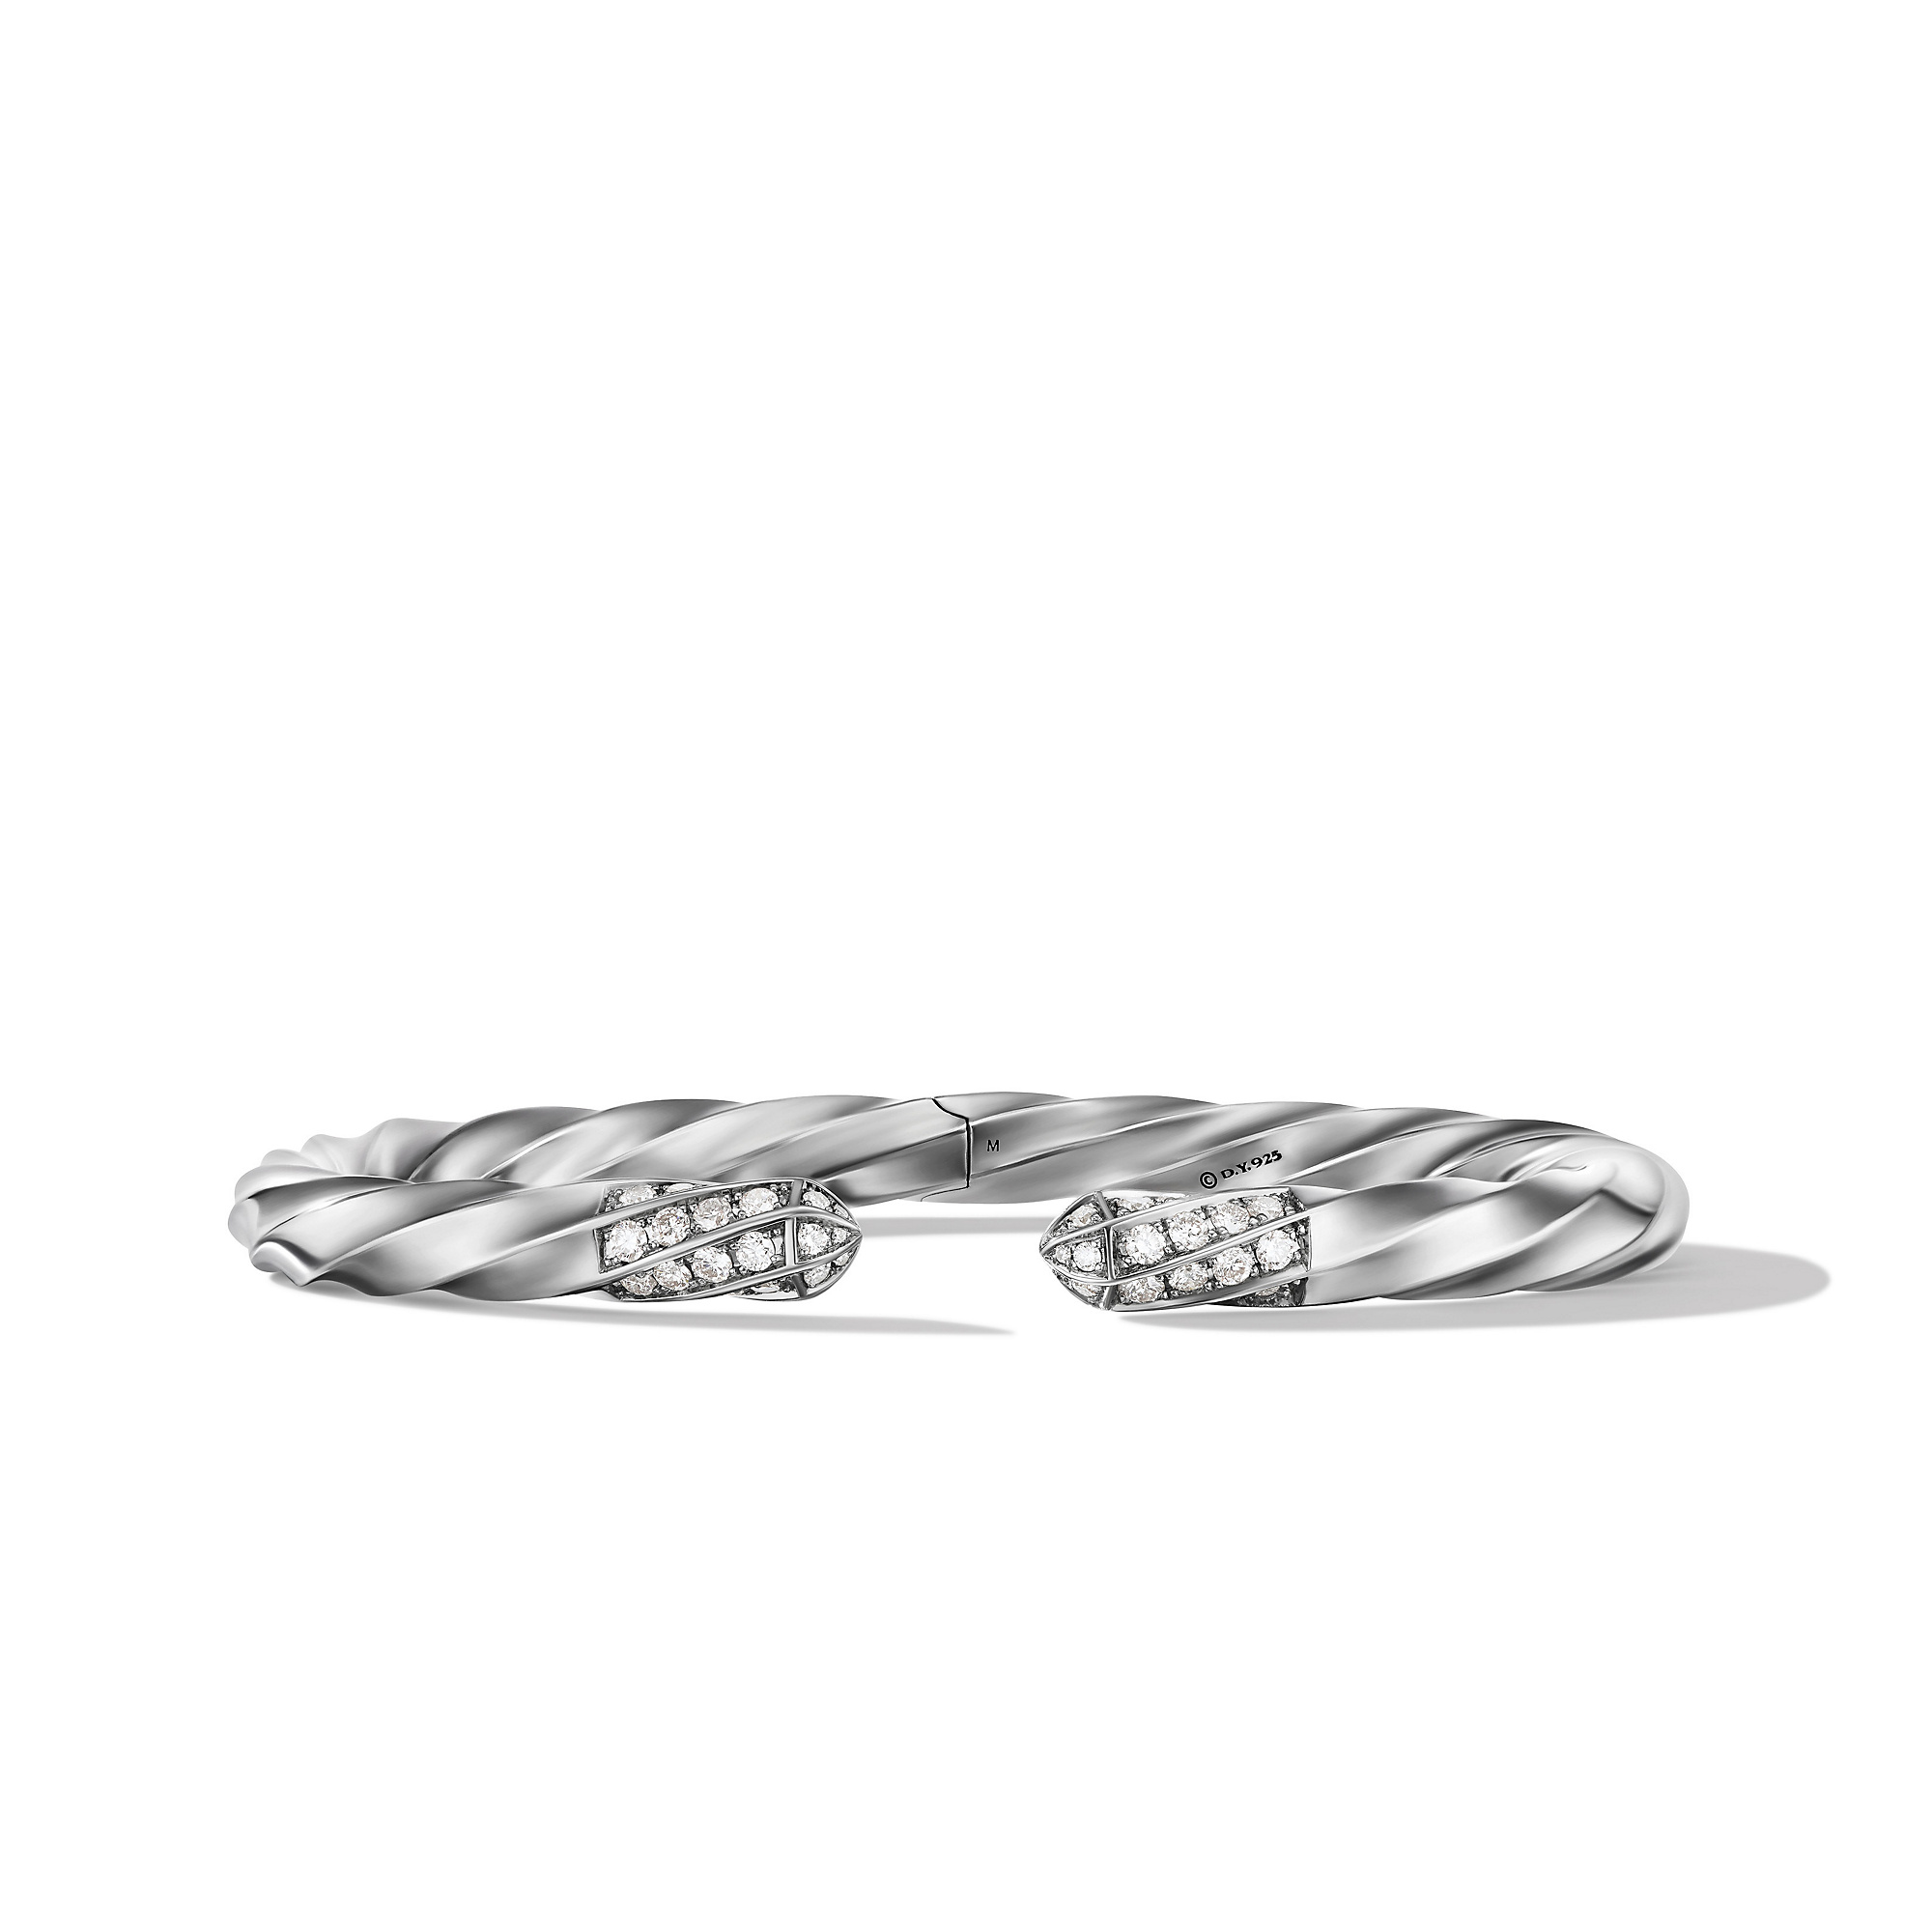 Cable Edge™ Bracelet in Recycled Sterling Silver with Pave Diamonds